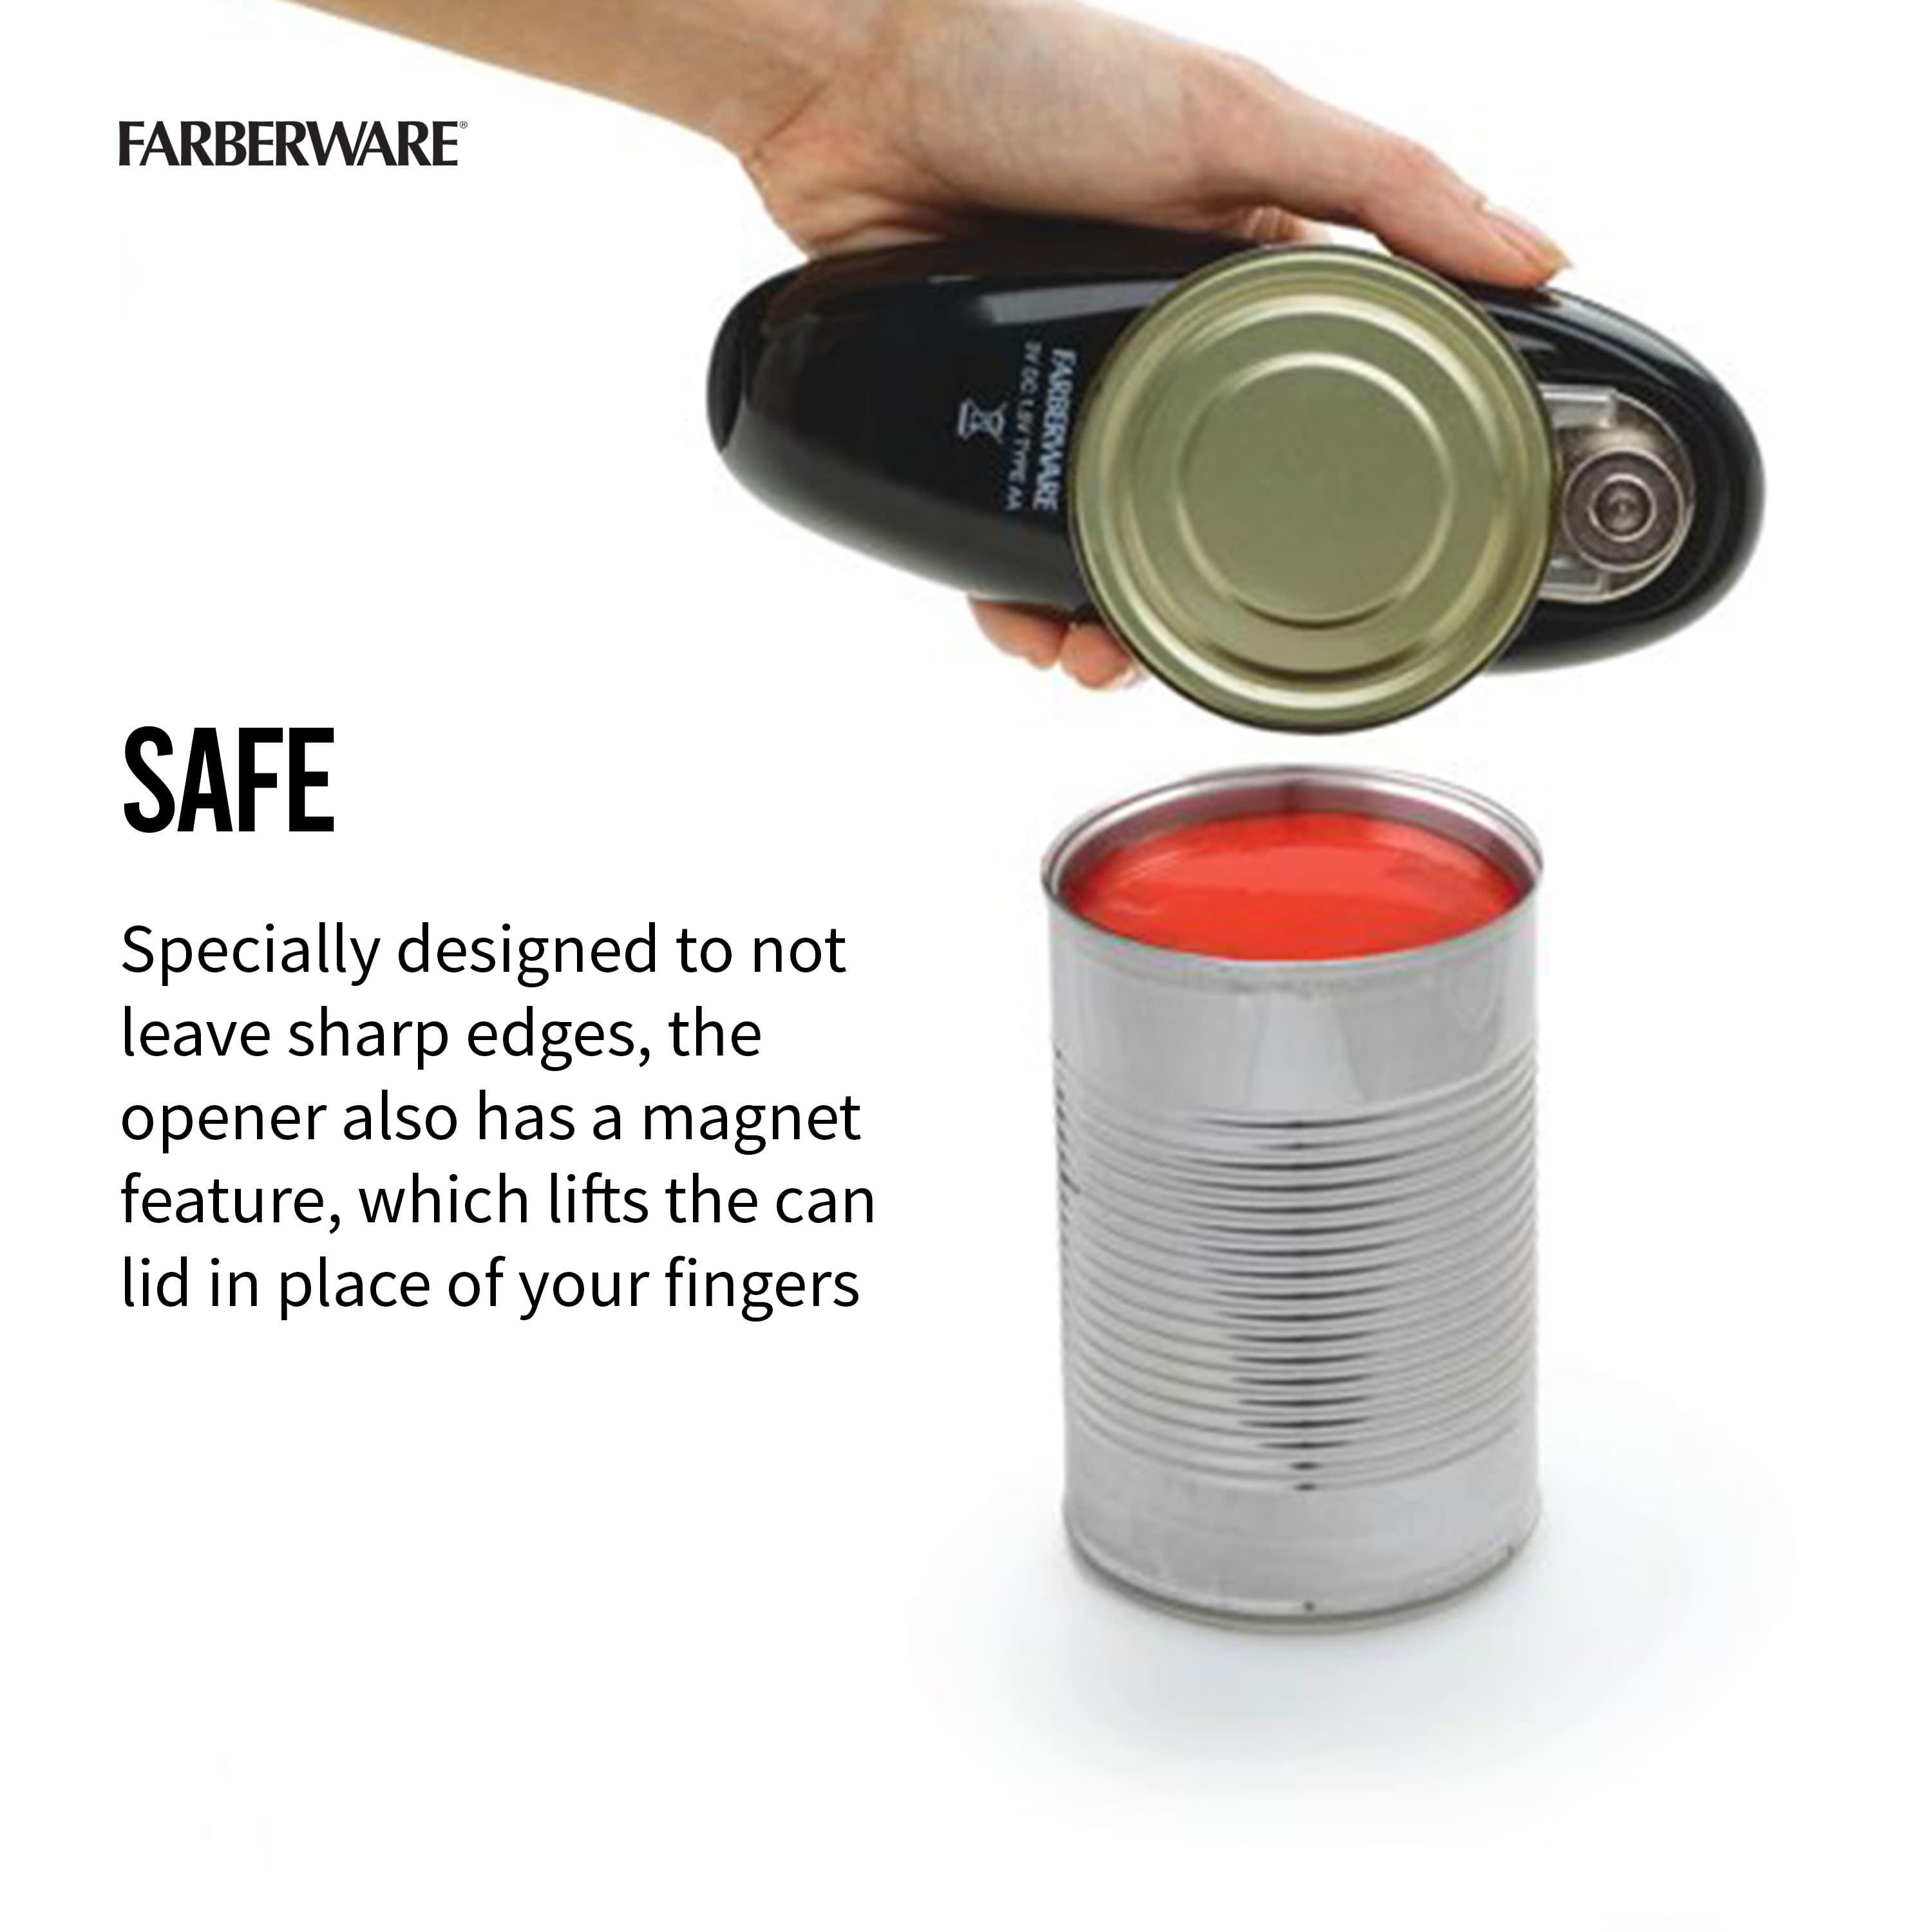 Farberware Electric Can Opener Red One Touch Hands Free - Brand New